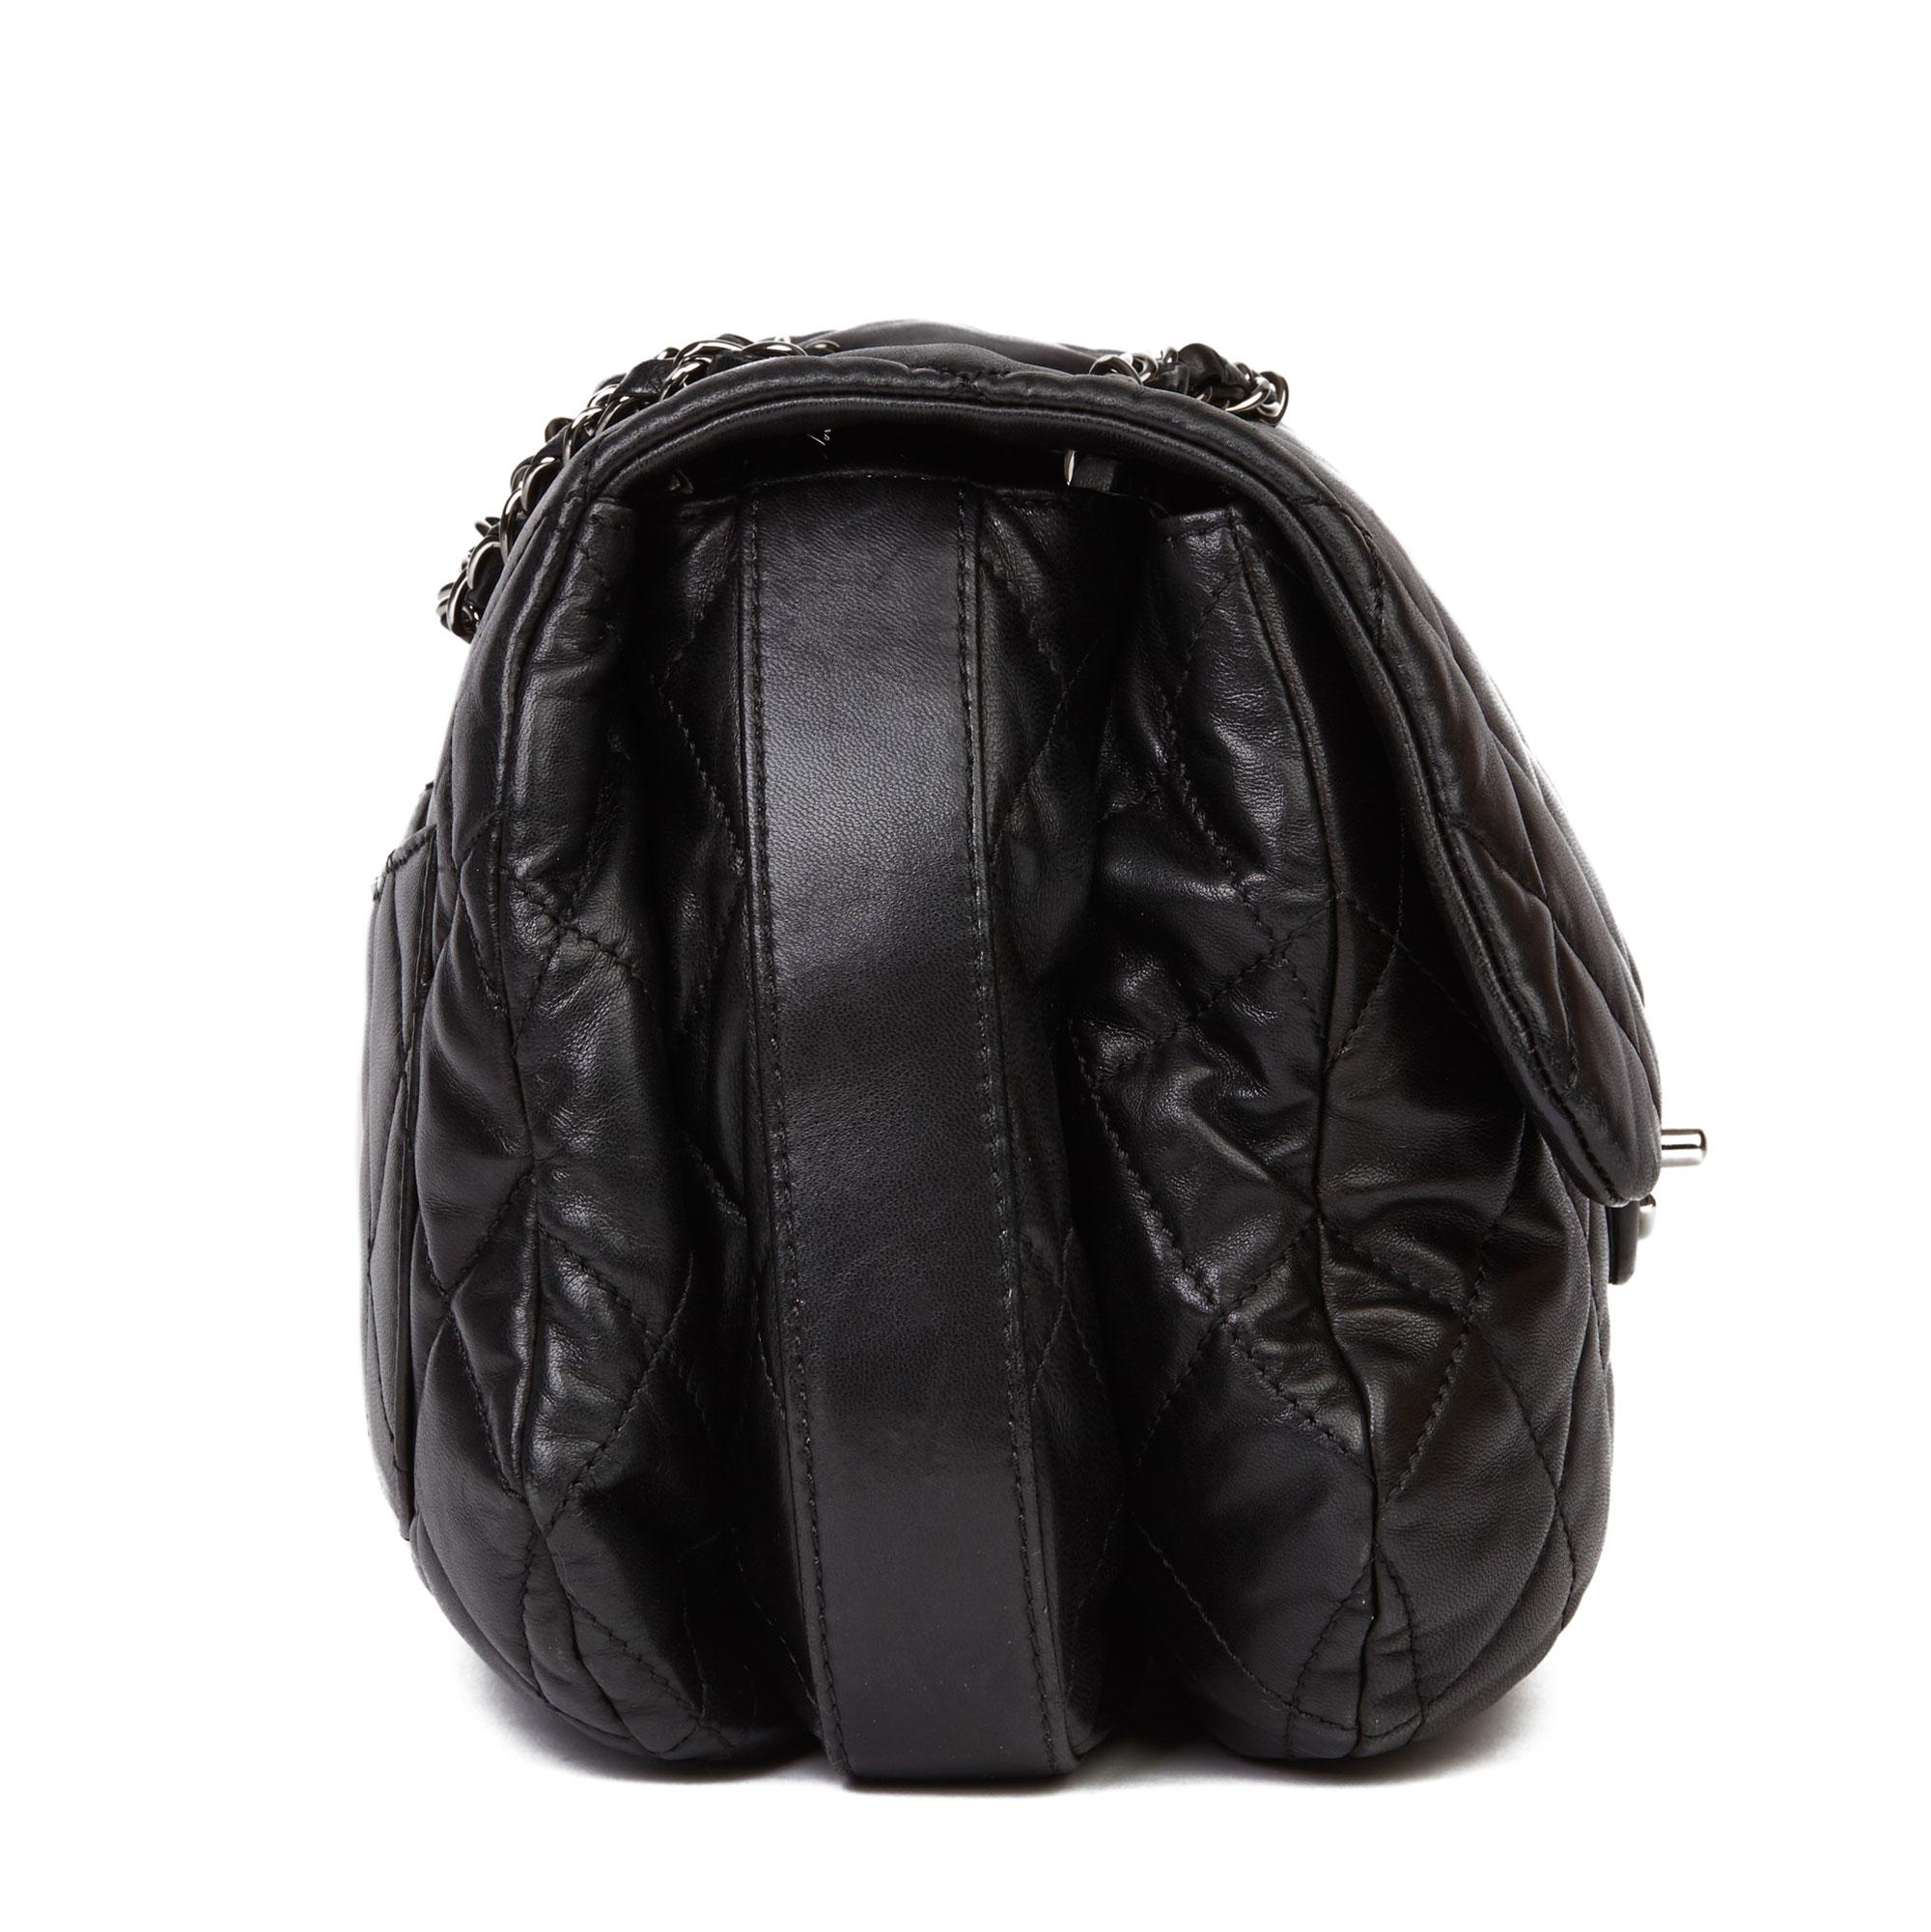 CHANEL
Black Quilted Lambskin Triple Compartment Classic Single Flap Bag

Xupes Reference: HB3656
Serial Number: 15358143
Age (Circa): 2011
Accompanied By: Chanel Dust Bag, Authenticity Card 
Authenticity Details: Authenticity Card, Serial Sticker